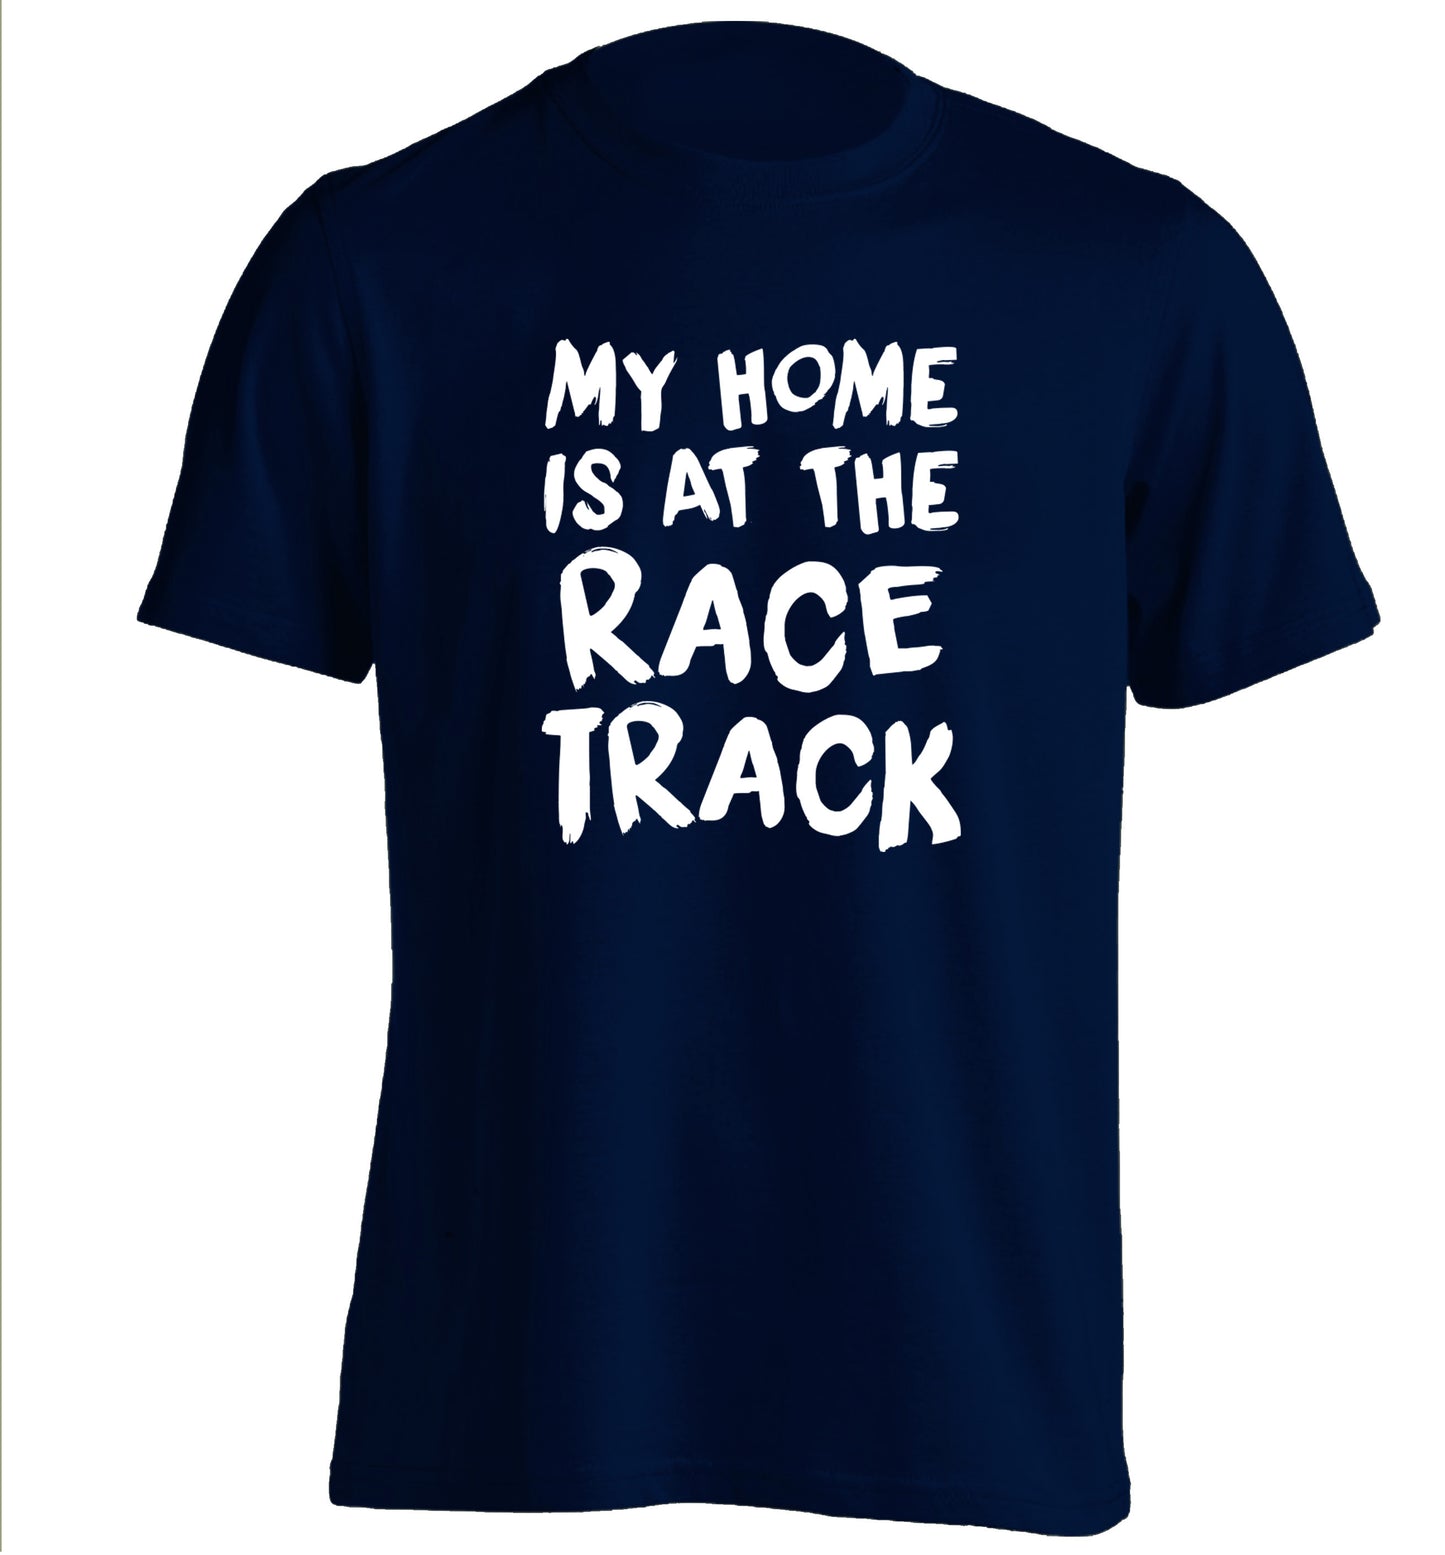 My home is at the race track adults unisex navy Tshirt 2XL